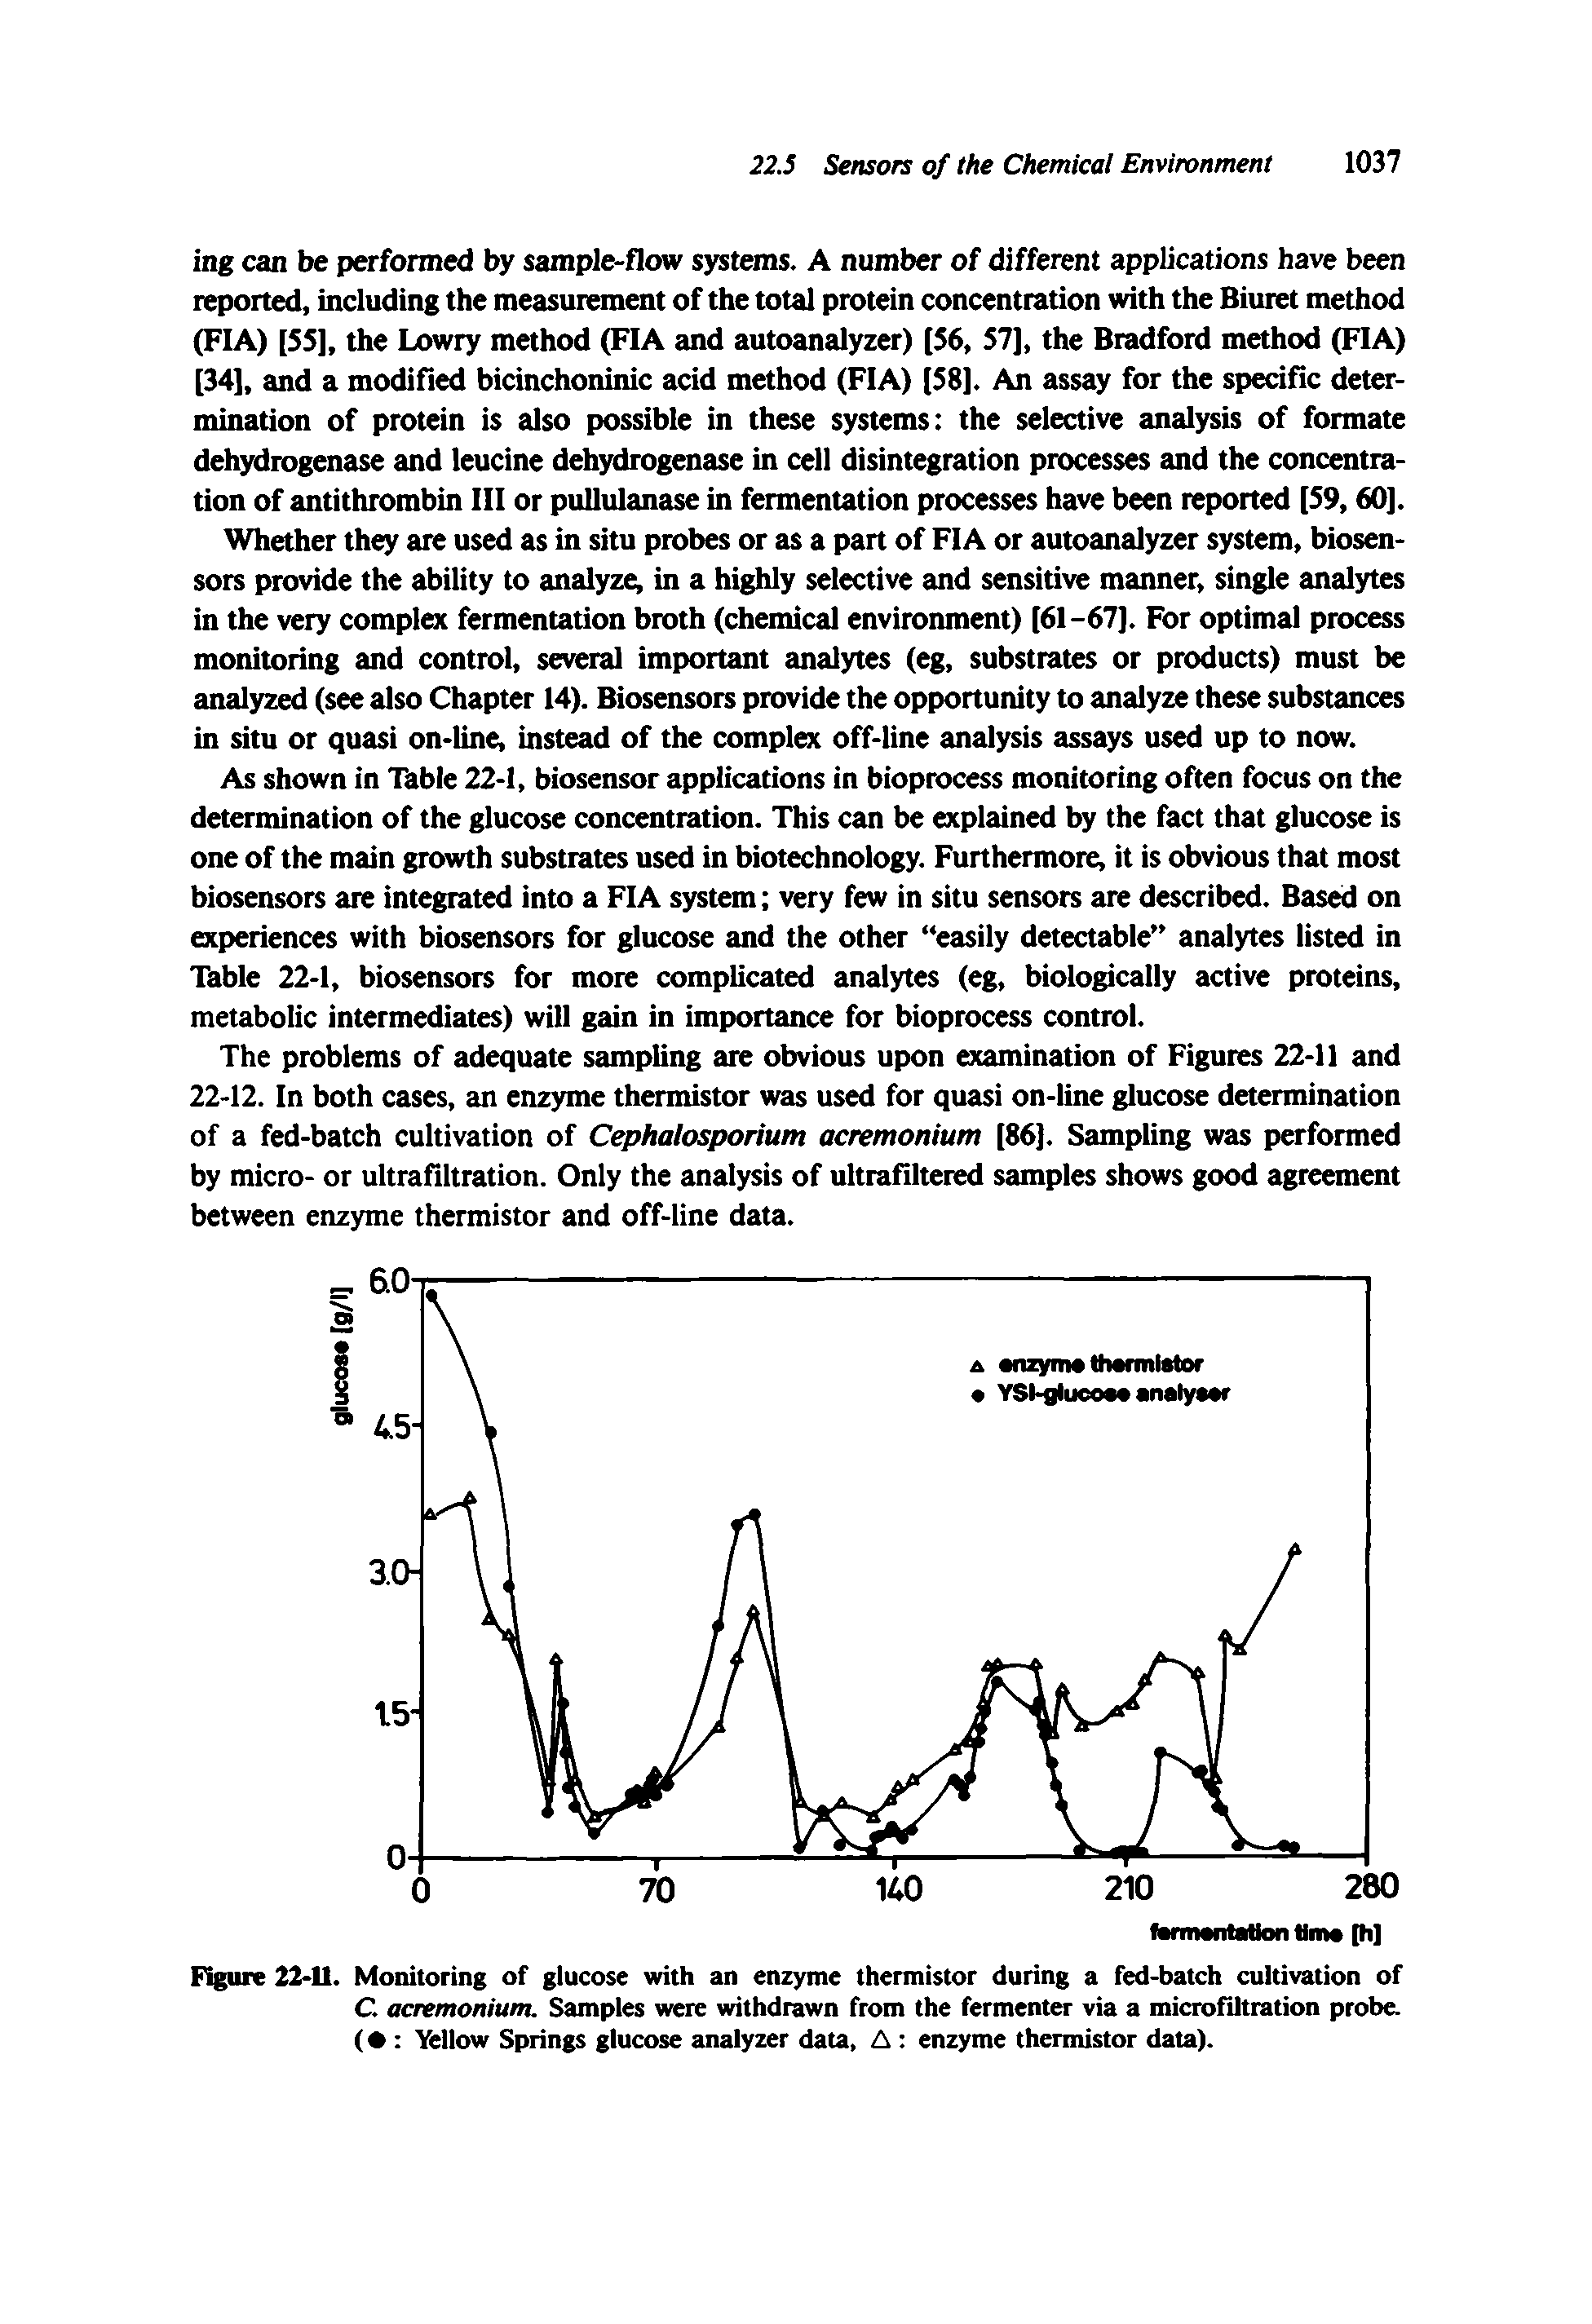 Figure 22-11. Monitoring of glucose with an enzyme thermistor during a fed-batch cultivation of C. acremonium. Samples were withdrawn from the fermenter via a microfiltration probe. ( Yellow Springs glucose analyzer data, A enzyme thermistor data).